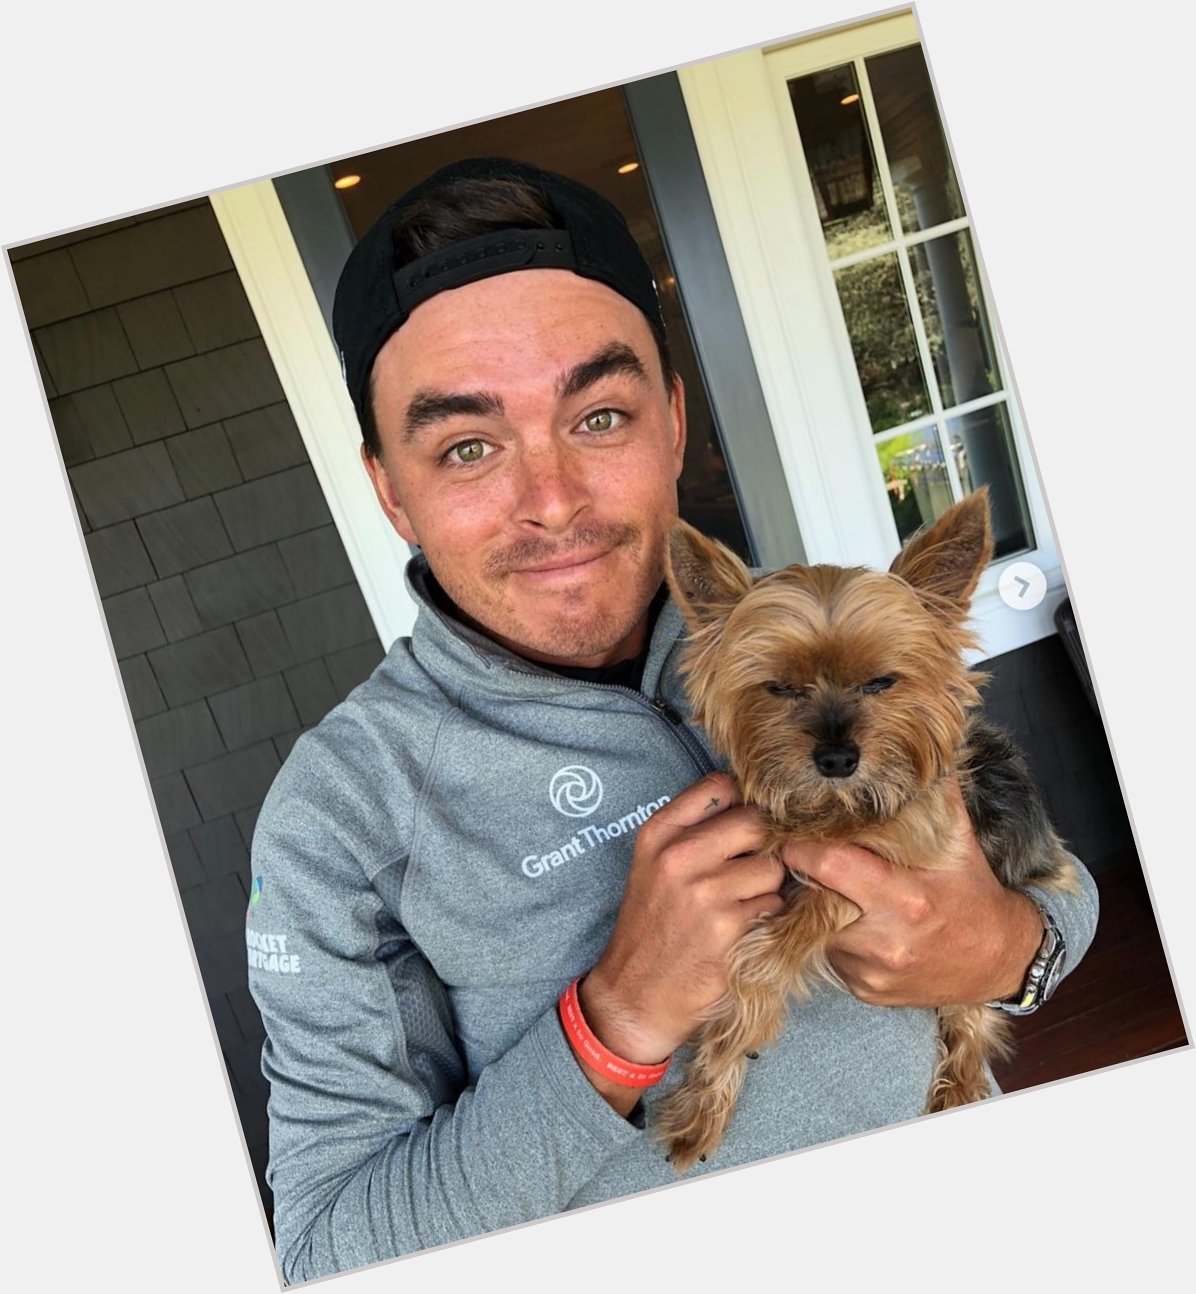 Happy Birthday to Rickie Fowler who celebrated his 30th birthday with Justin Thomas and Michelle Wie. 